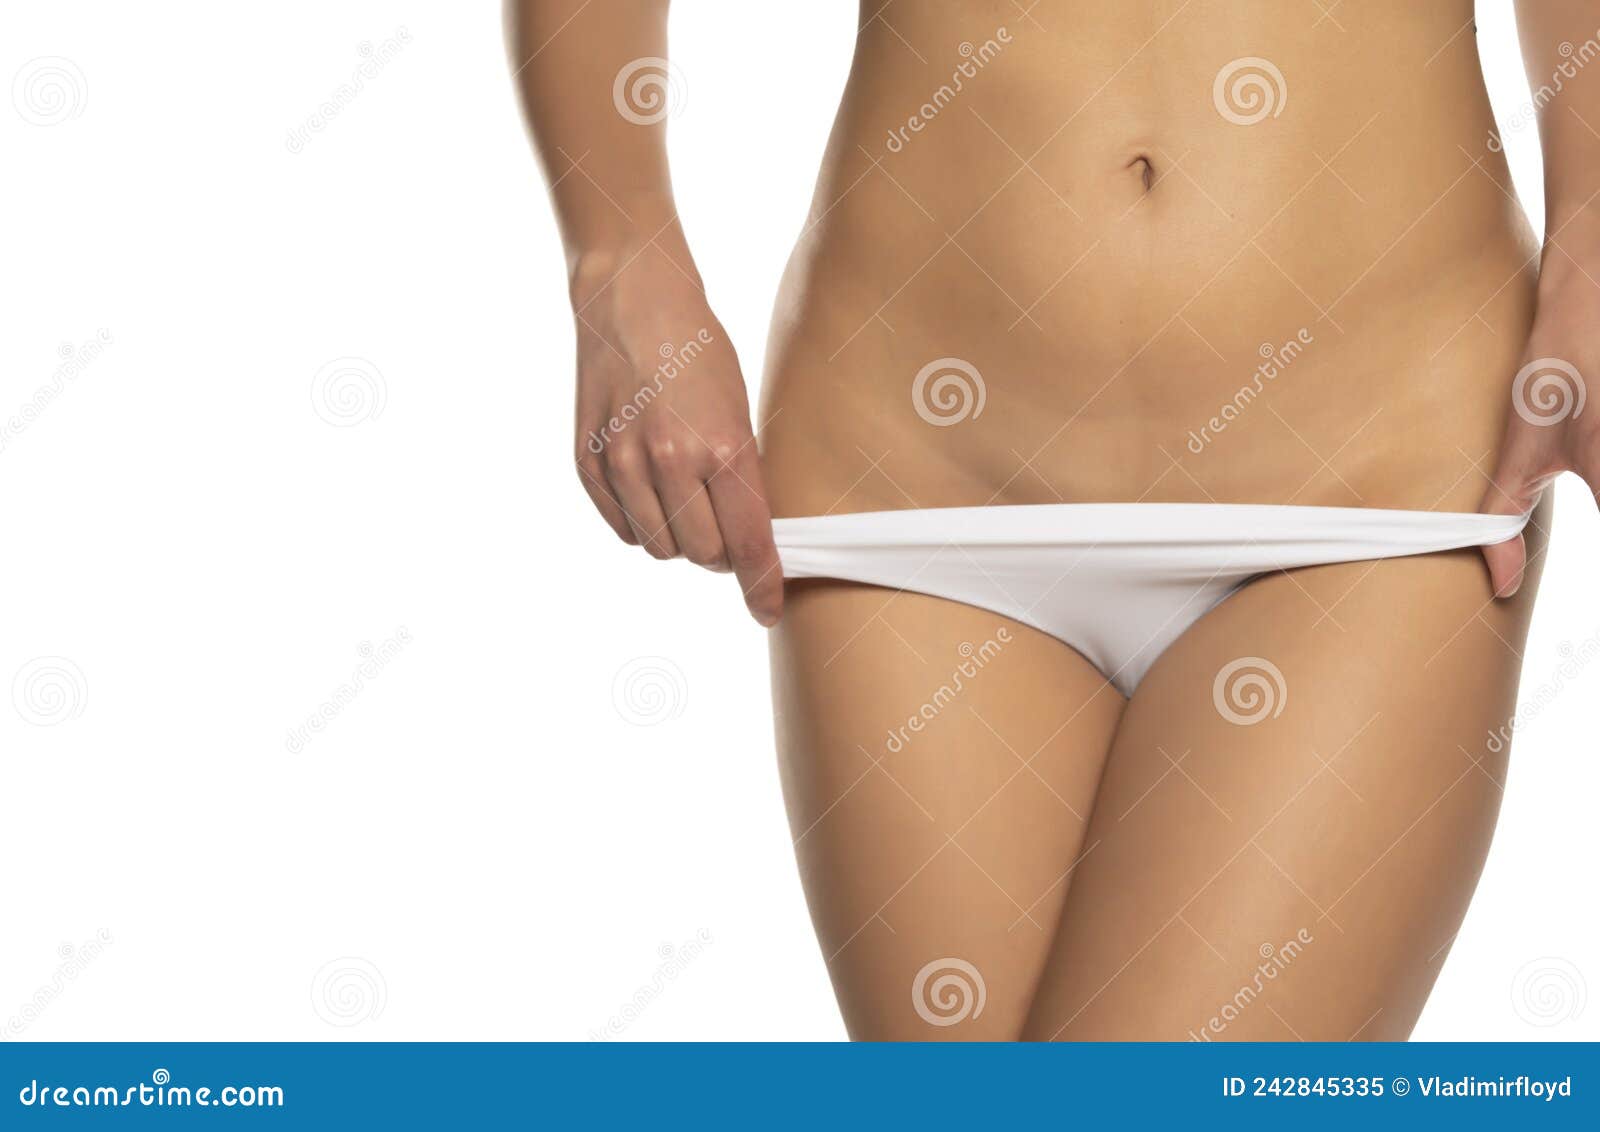 Young Woman Showing Her Hairless Pubic Area Under Her Panties Stock Image -  Image of underwear, bikini: 242845335